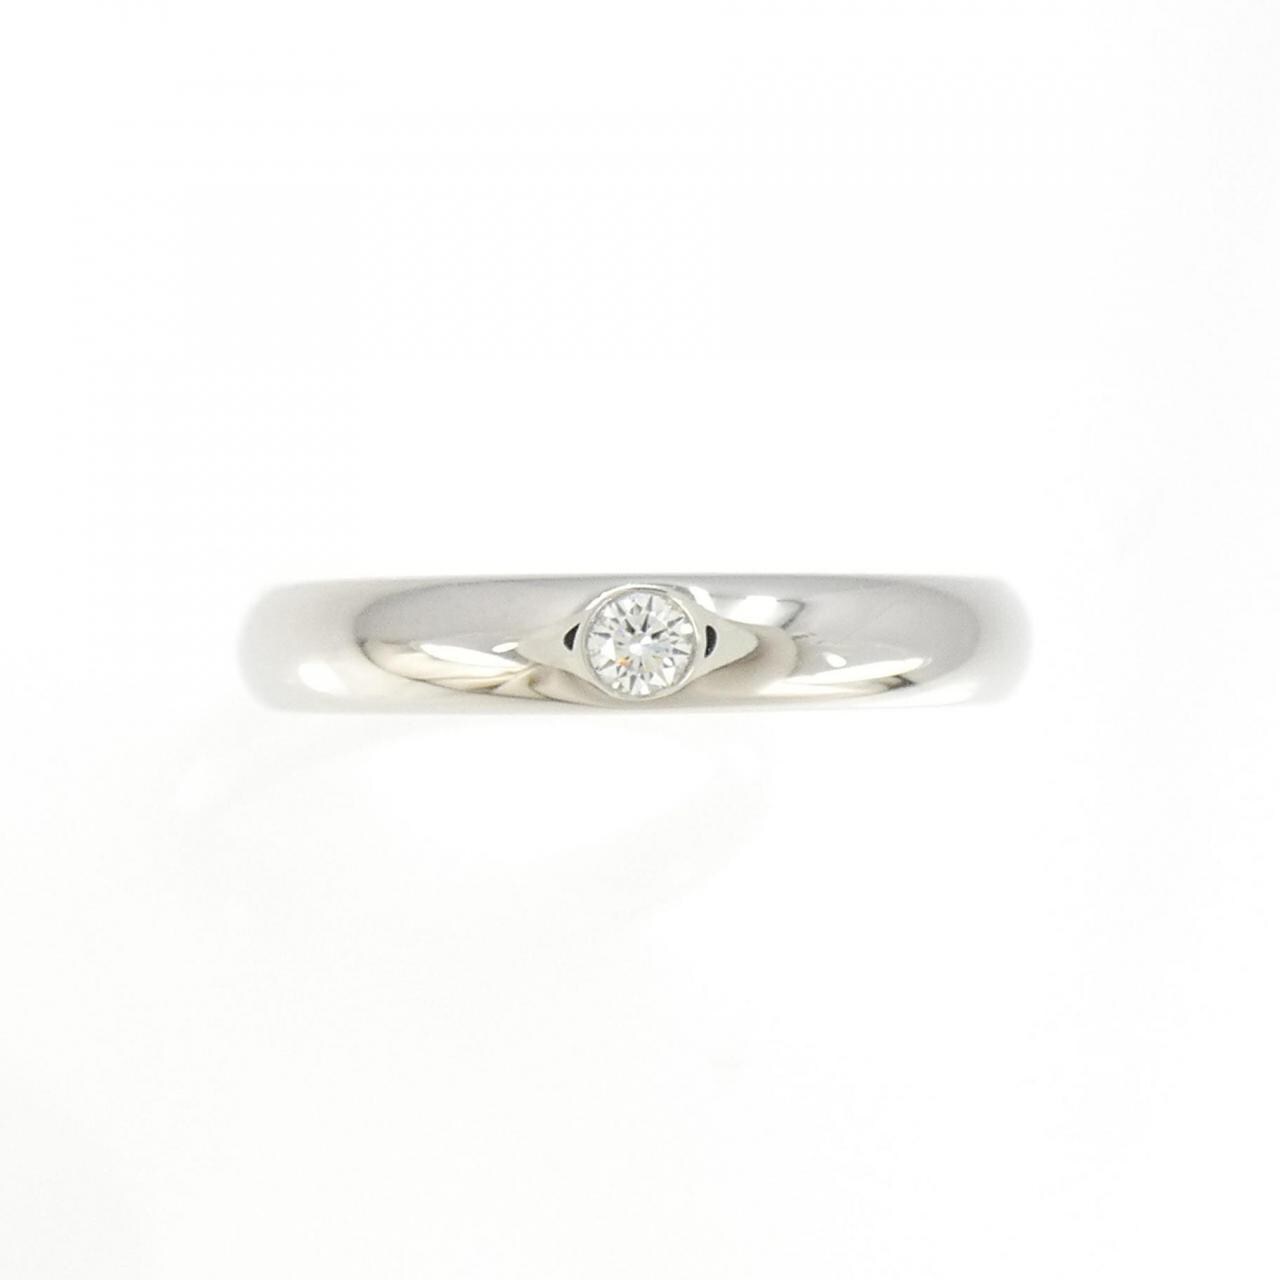 HARRY WINSTON Round Marriage Ring